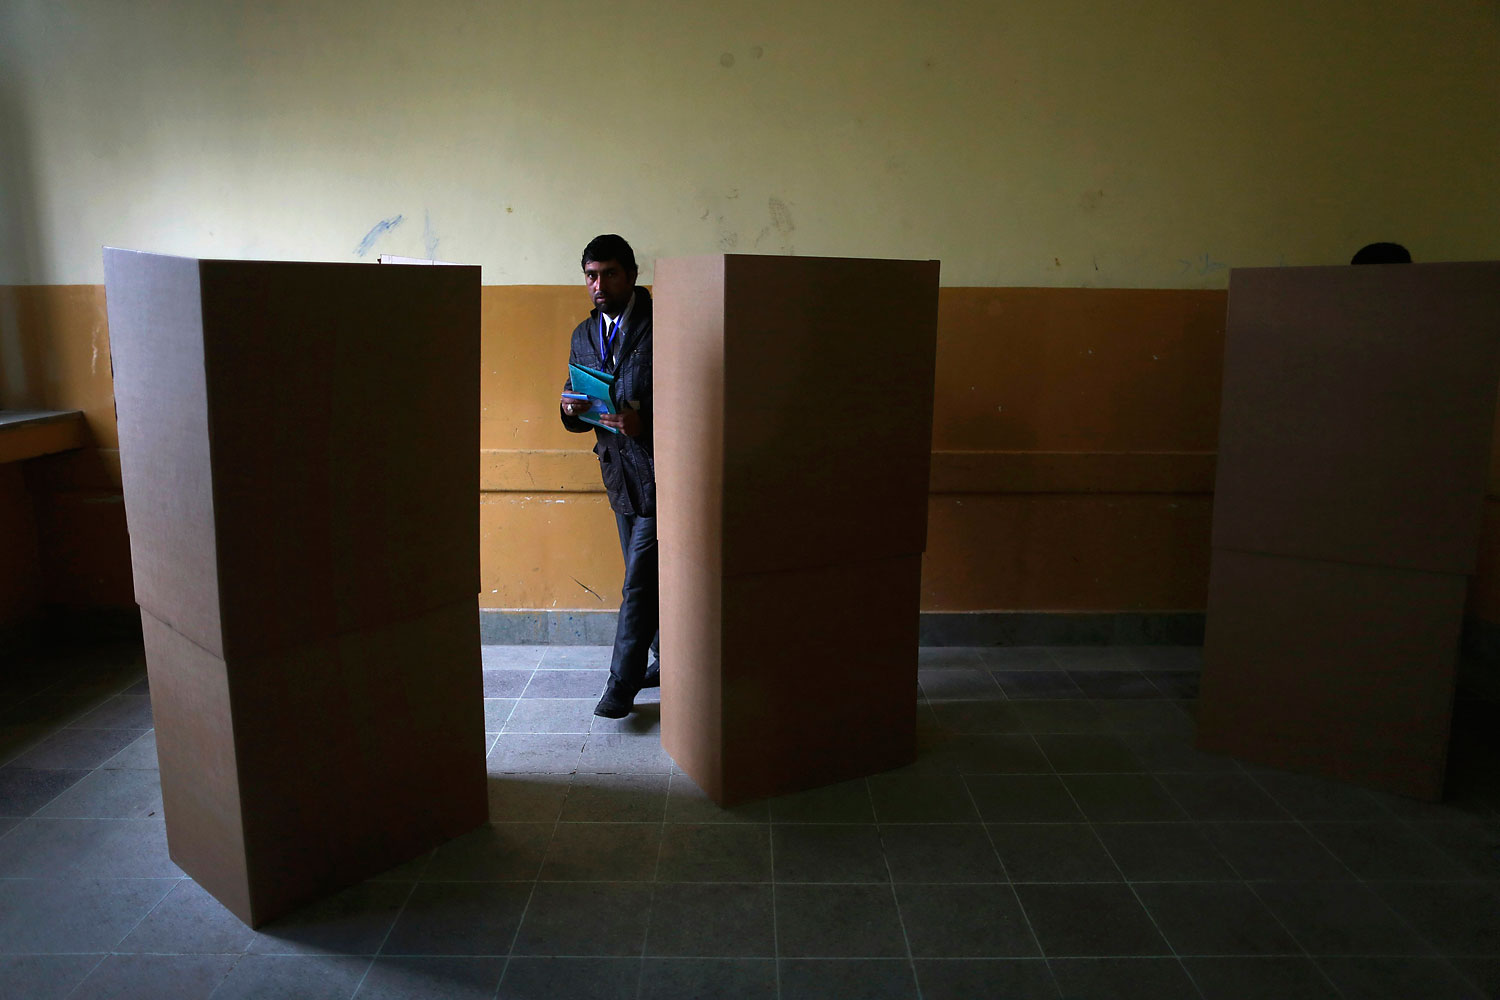 An Afghan man walks from a voting booth after completing his ballot paper at a polling station in Kabul.